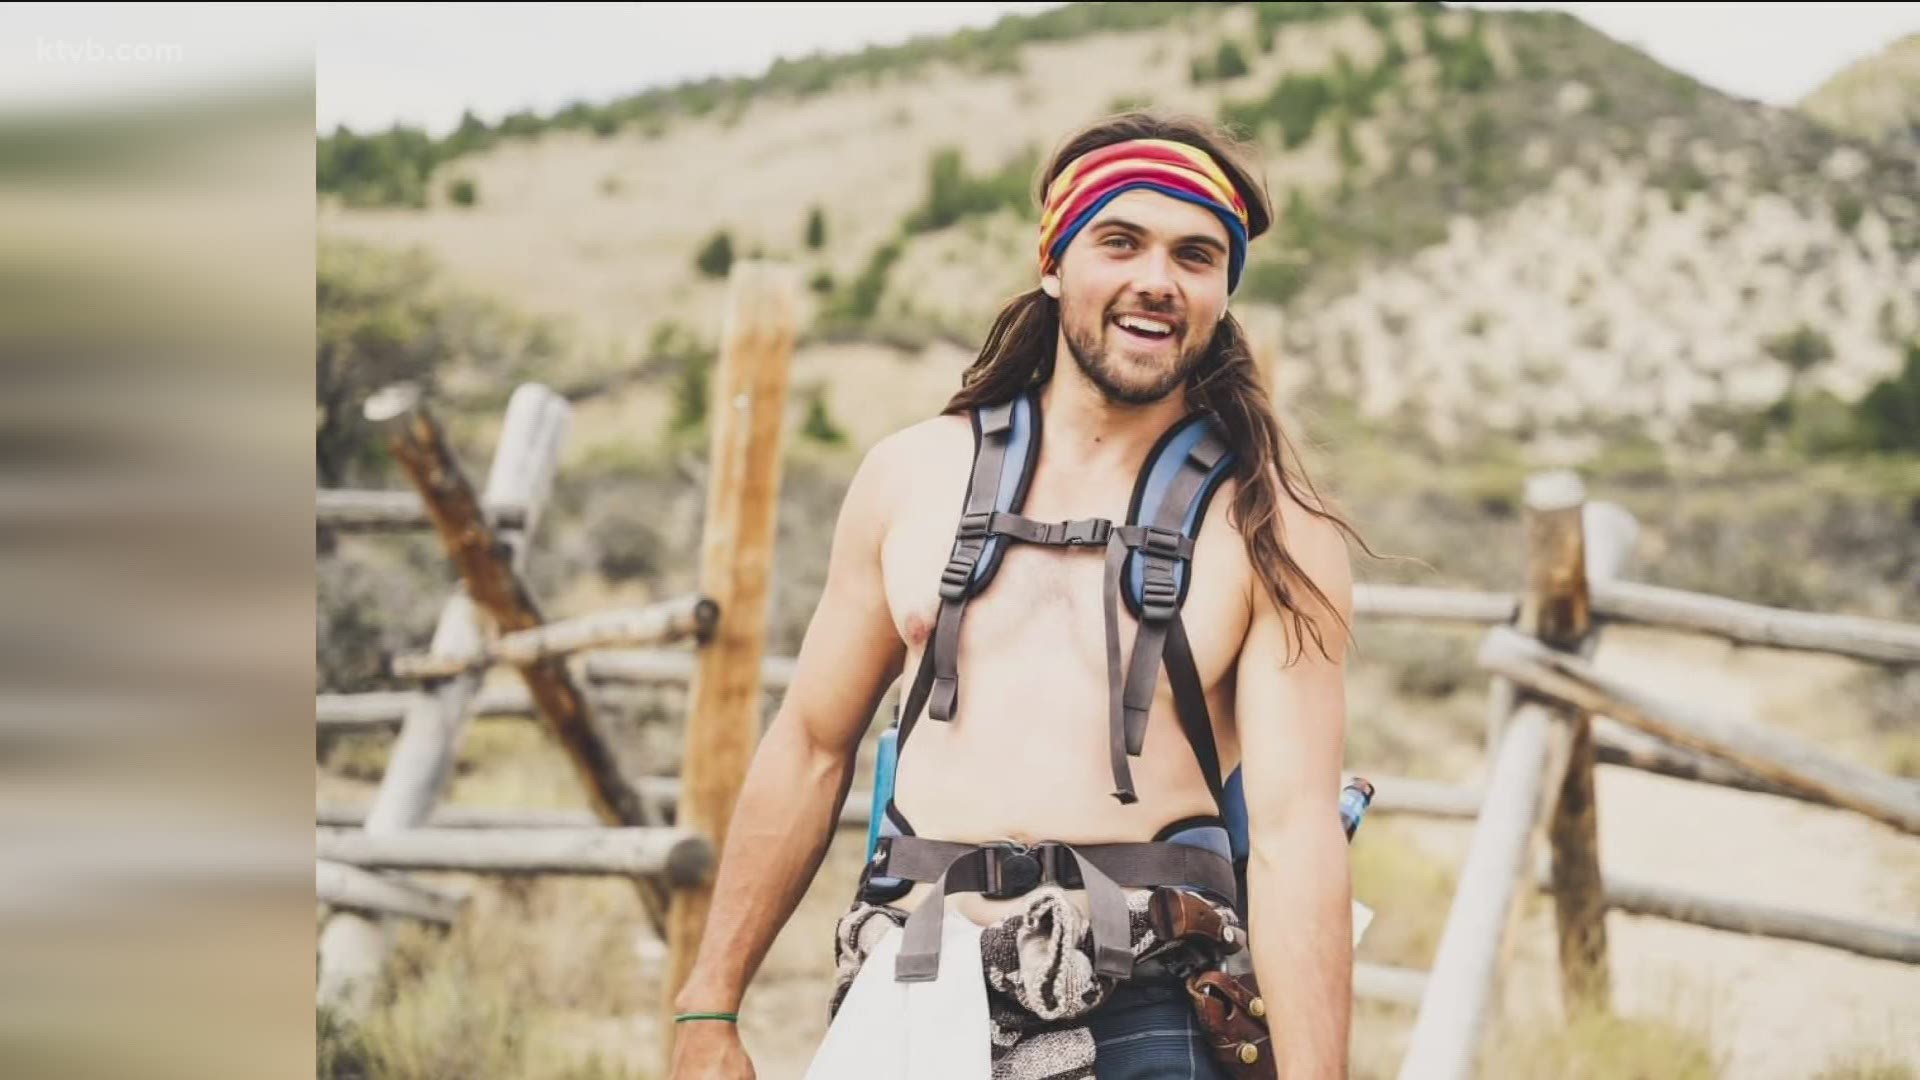 25-year-old Kyle Wimpenny was killed in a hiking accident sometime last week. Now, his close friends are remembering the impact he had on them.